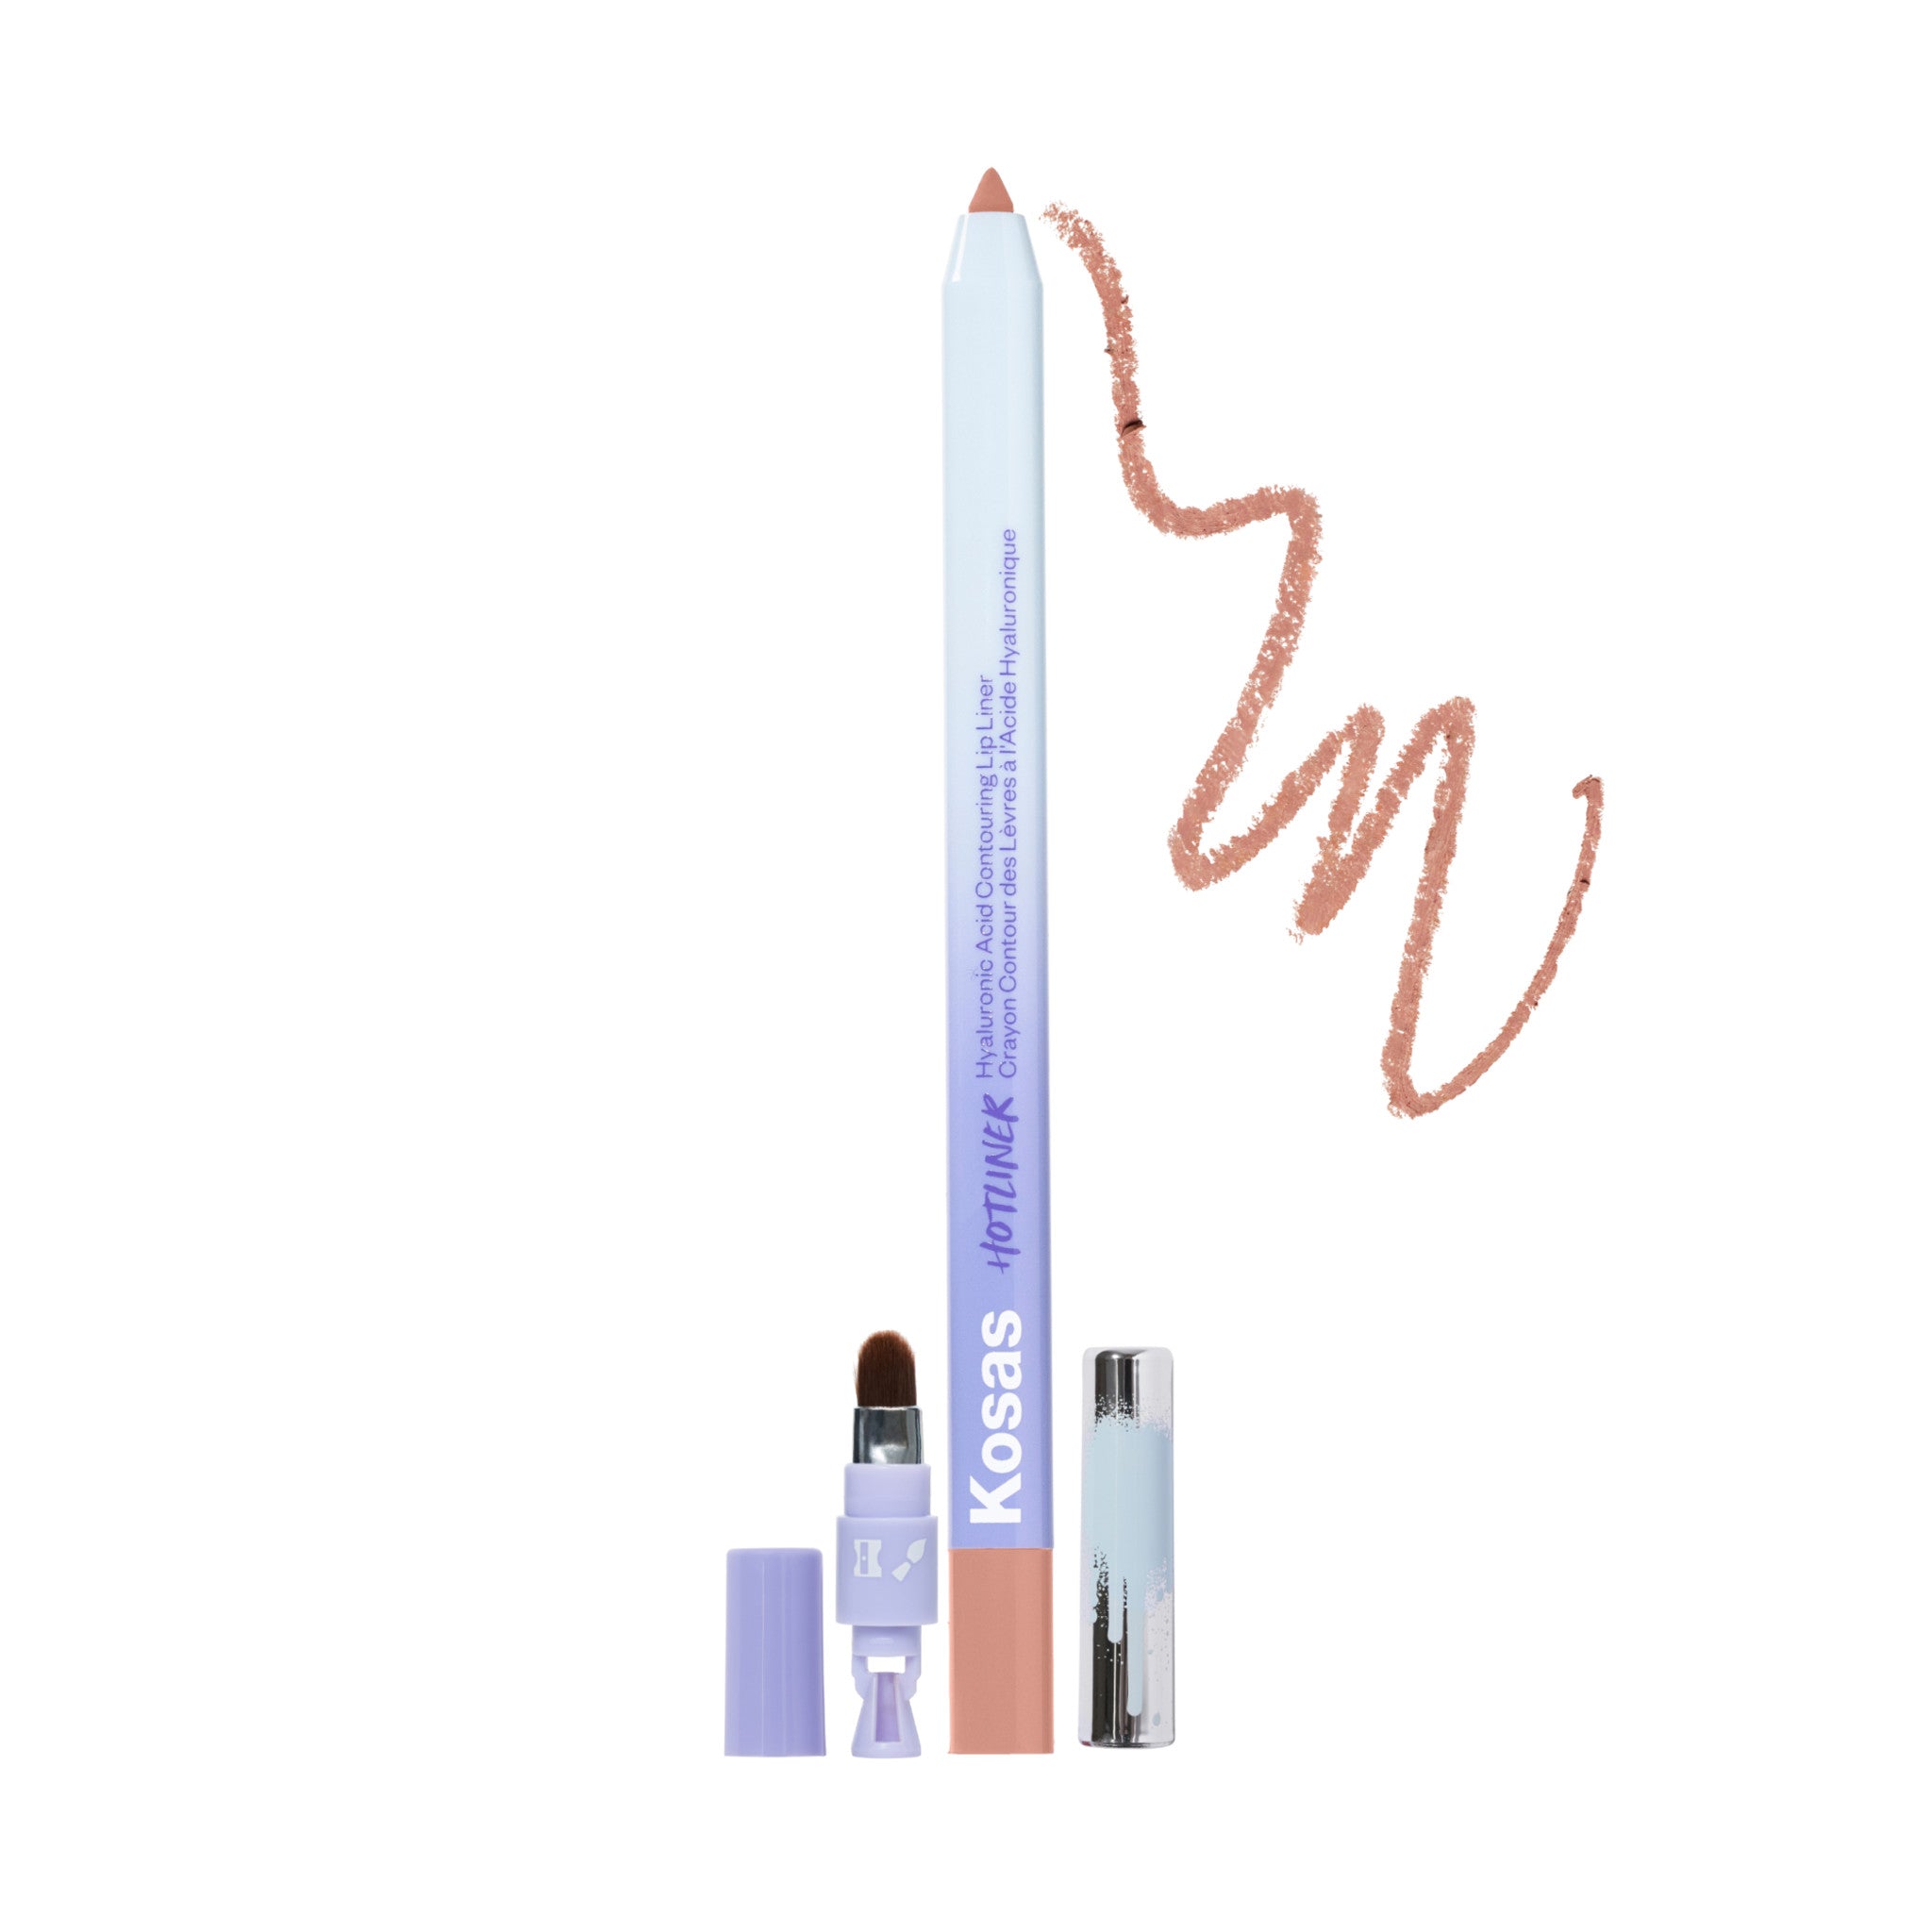 Kosas Hotliner Hyaluronic Acid Contouring Lip Liner Color/Shade variant: 100 main image. This product is in the color nude